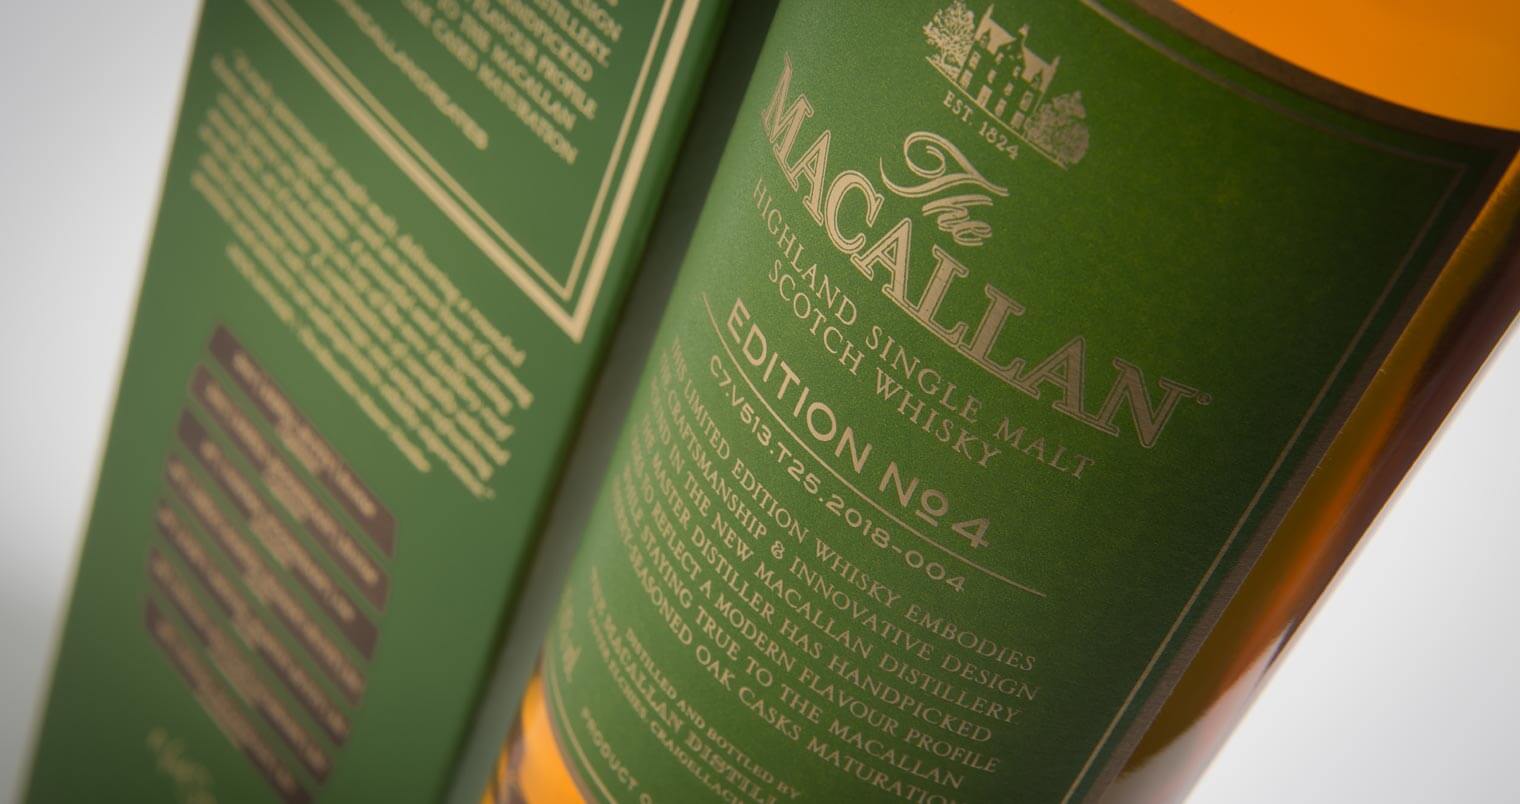 The Macallan Whisky Edition No.4, featured image